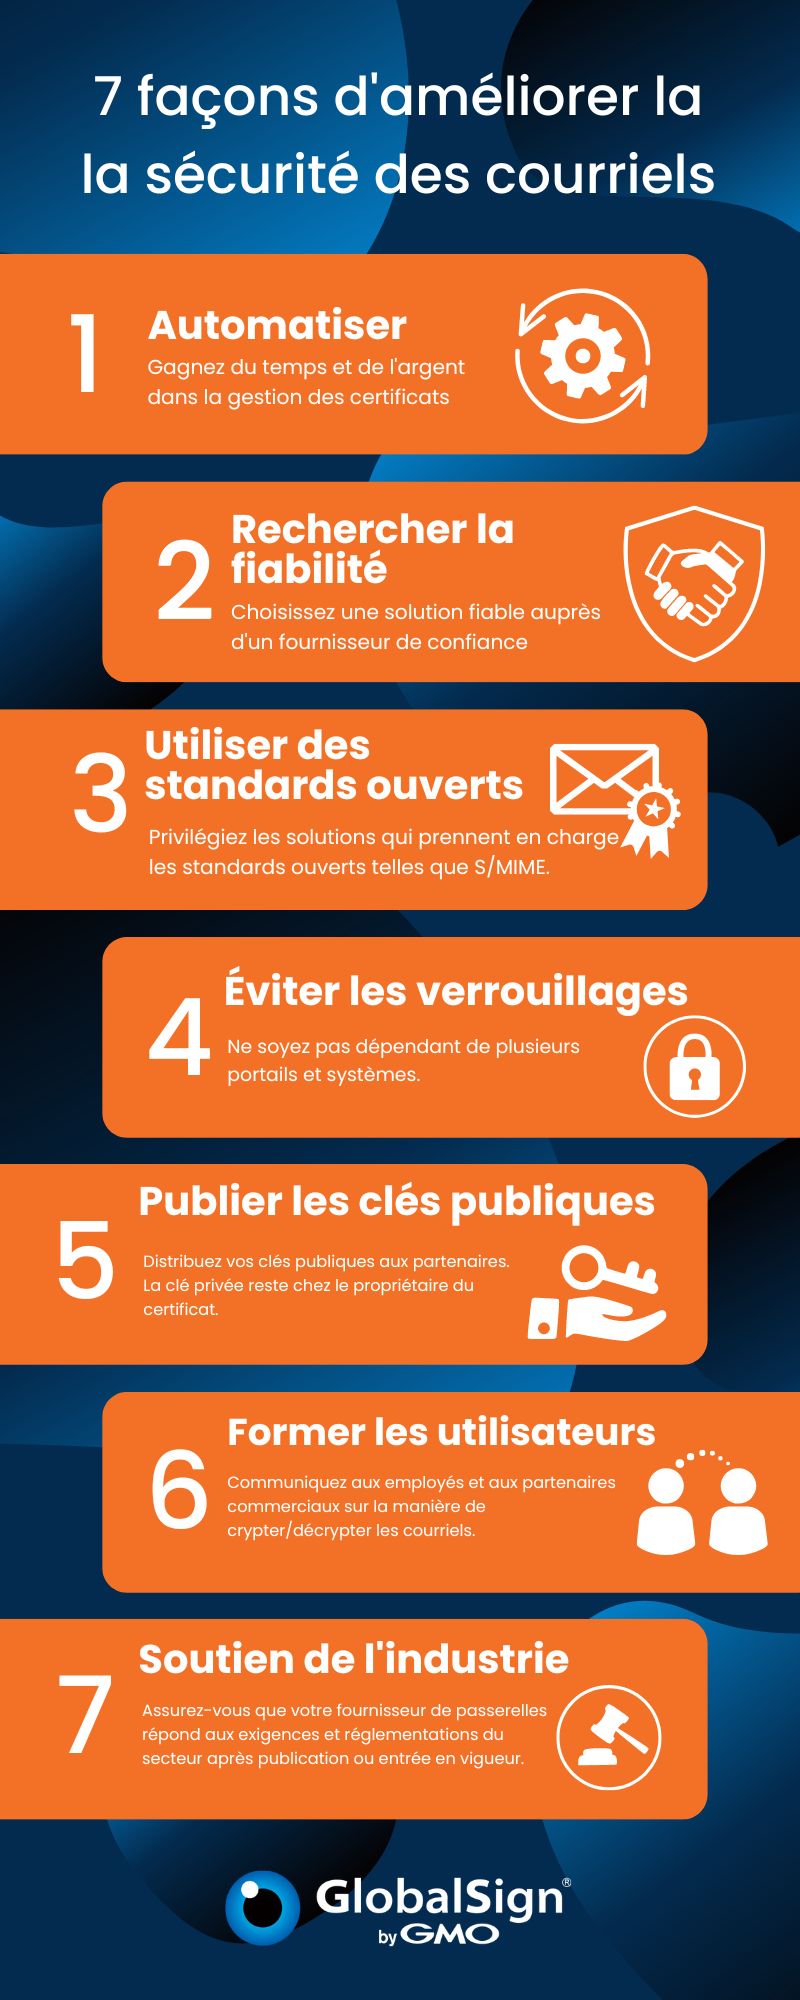 Copy of 26 Oct - Net at Work Infographic 7 Ways to Increase Email Security with Automated Encryption (1).jpg